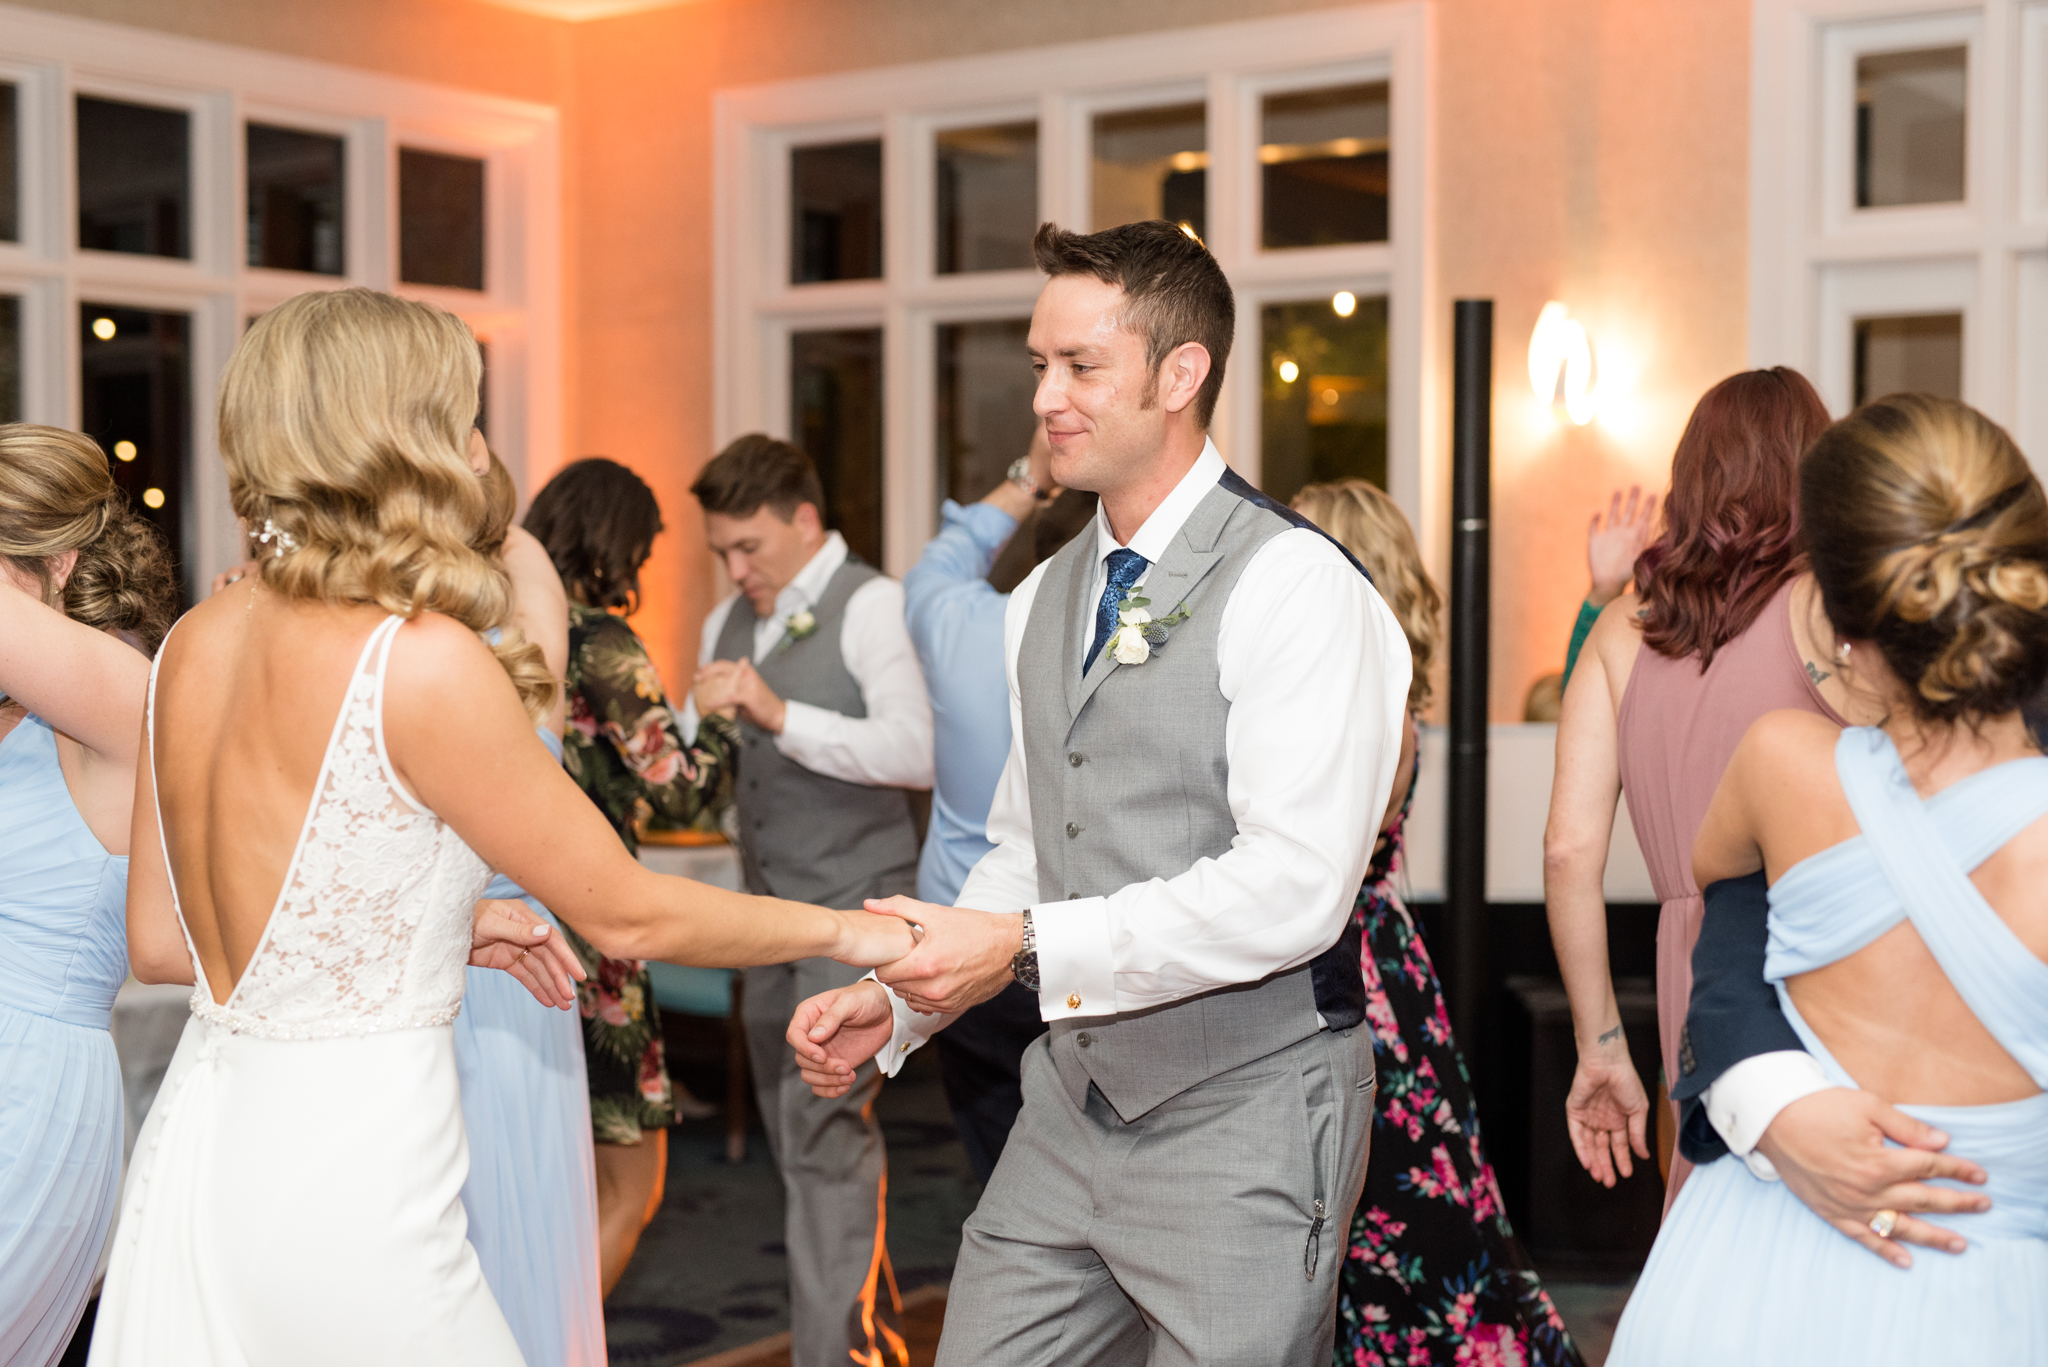 Bride and groom dance together at reception.